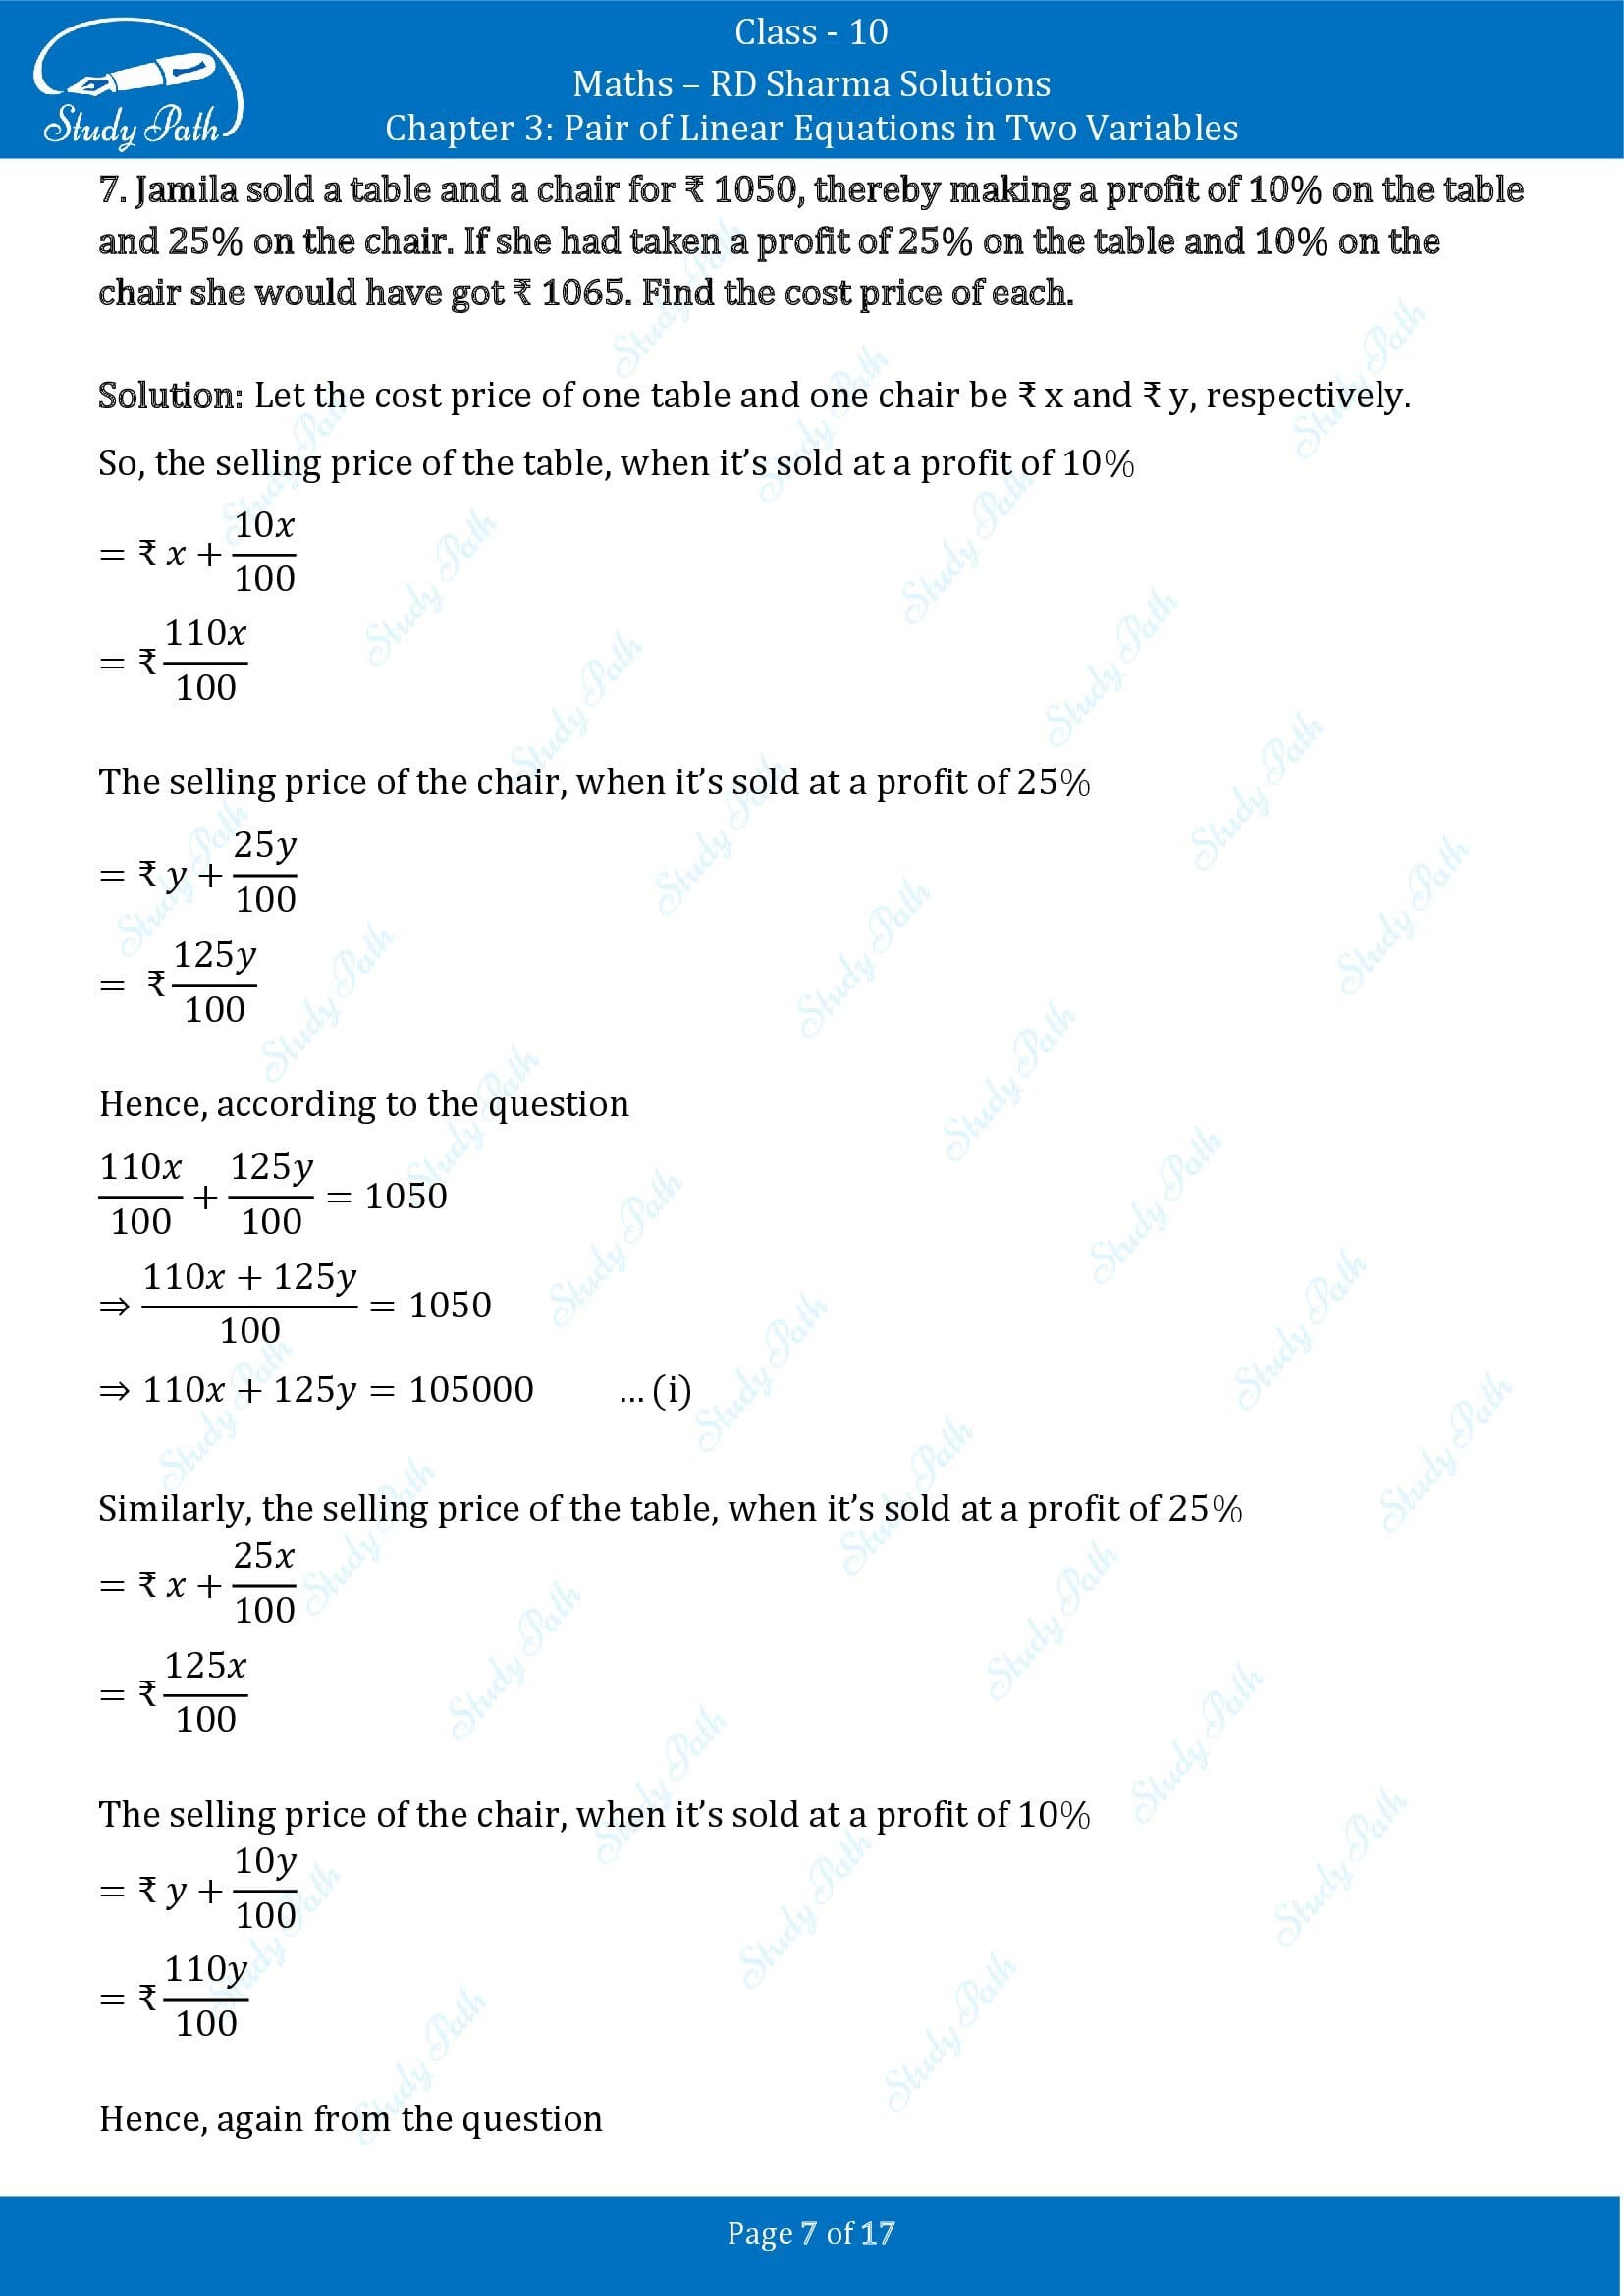 RD Sharma Solutions Class 10 Chapter 3 Pair of Linear Equations in Two Variables Exercise 3.6 00007